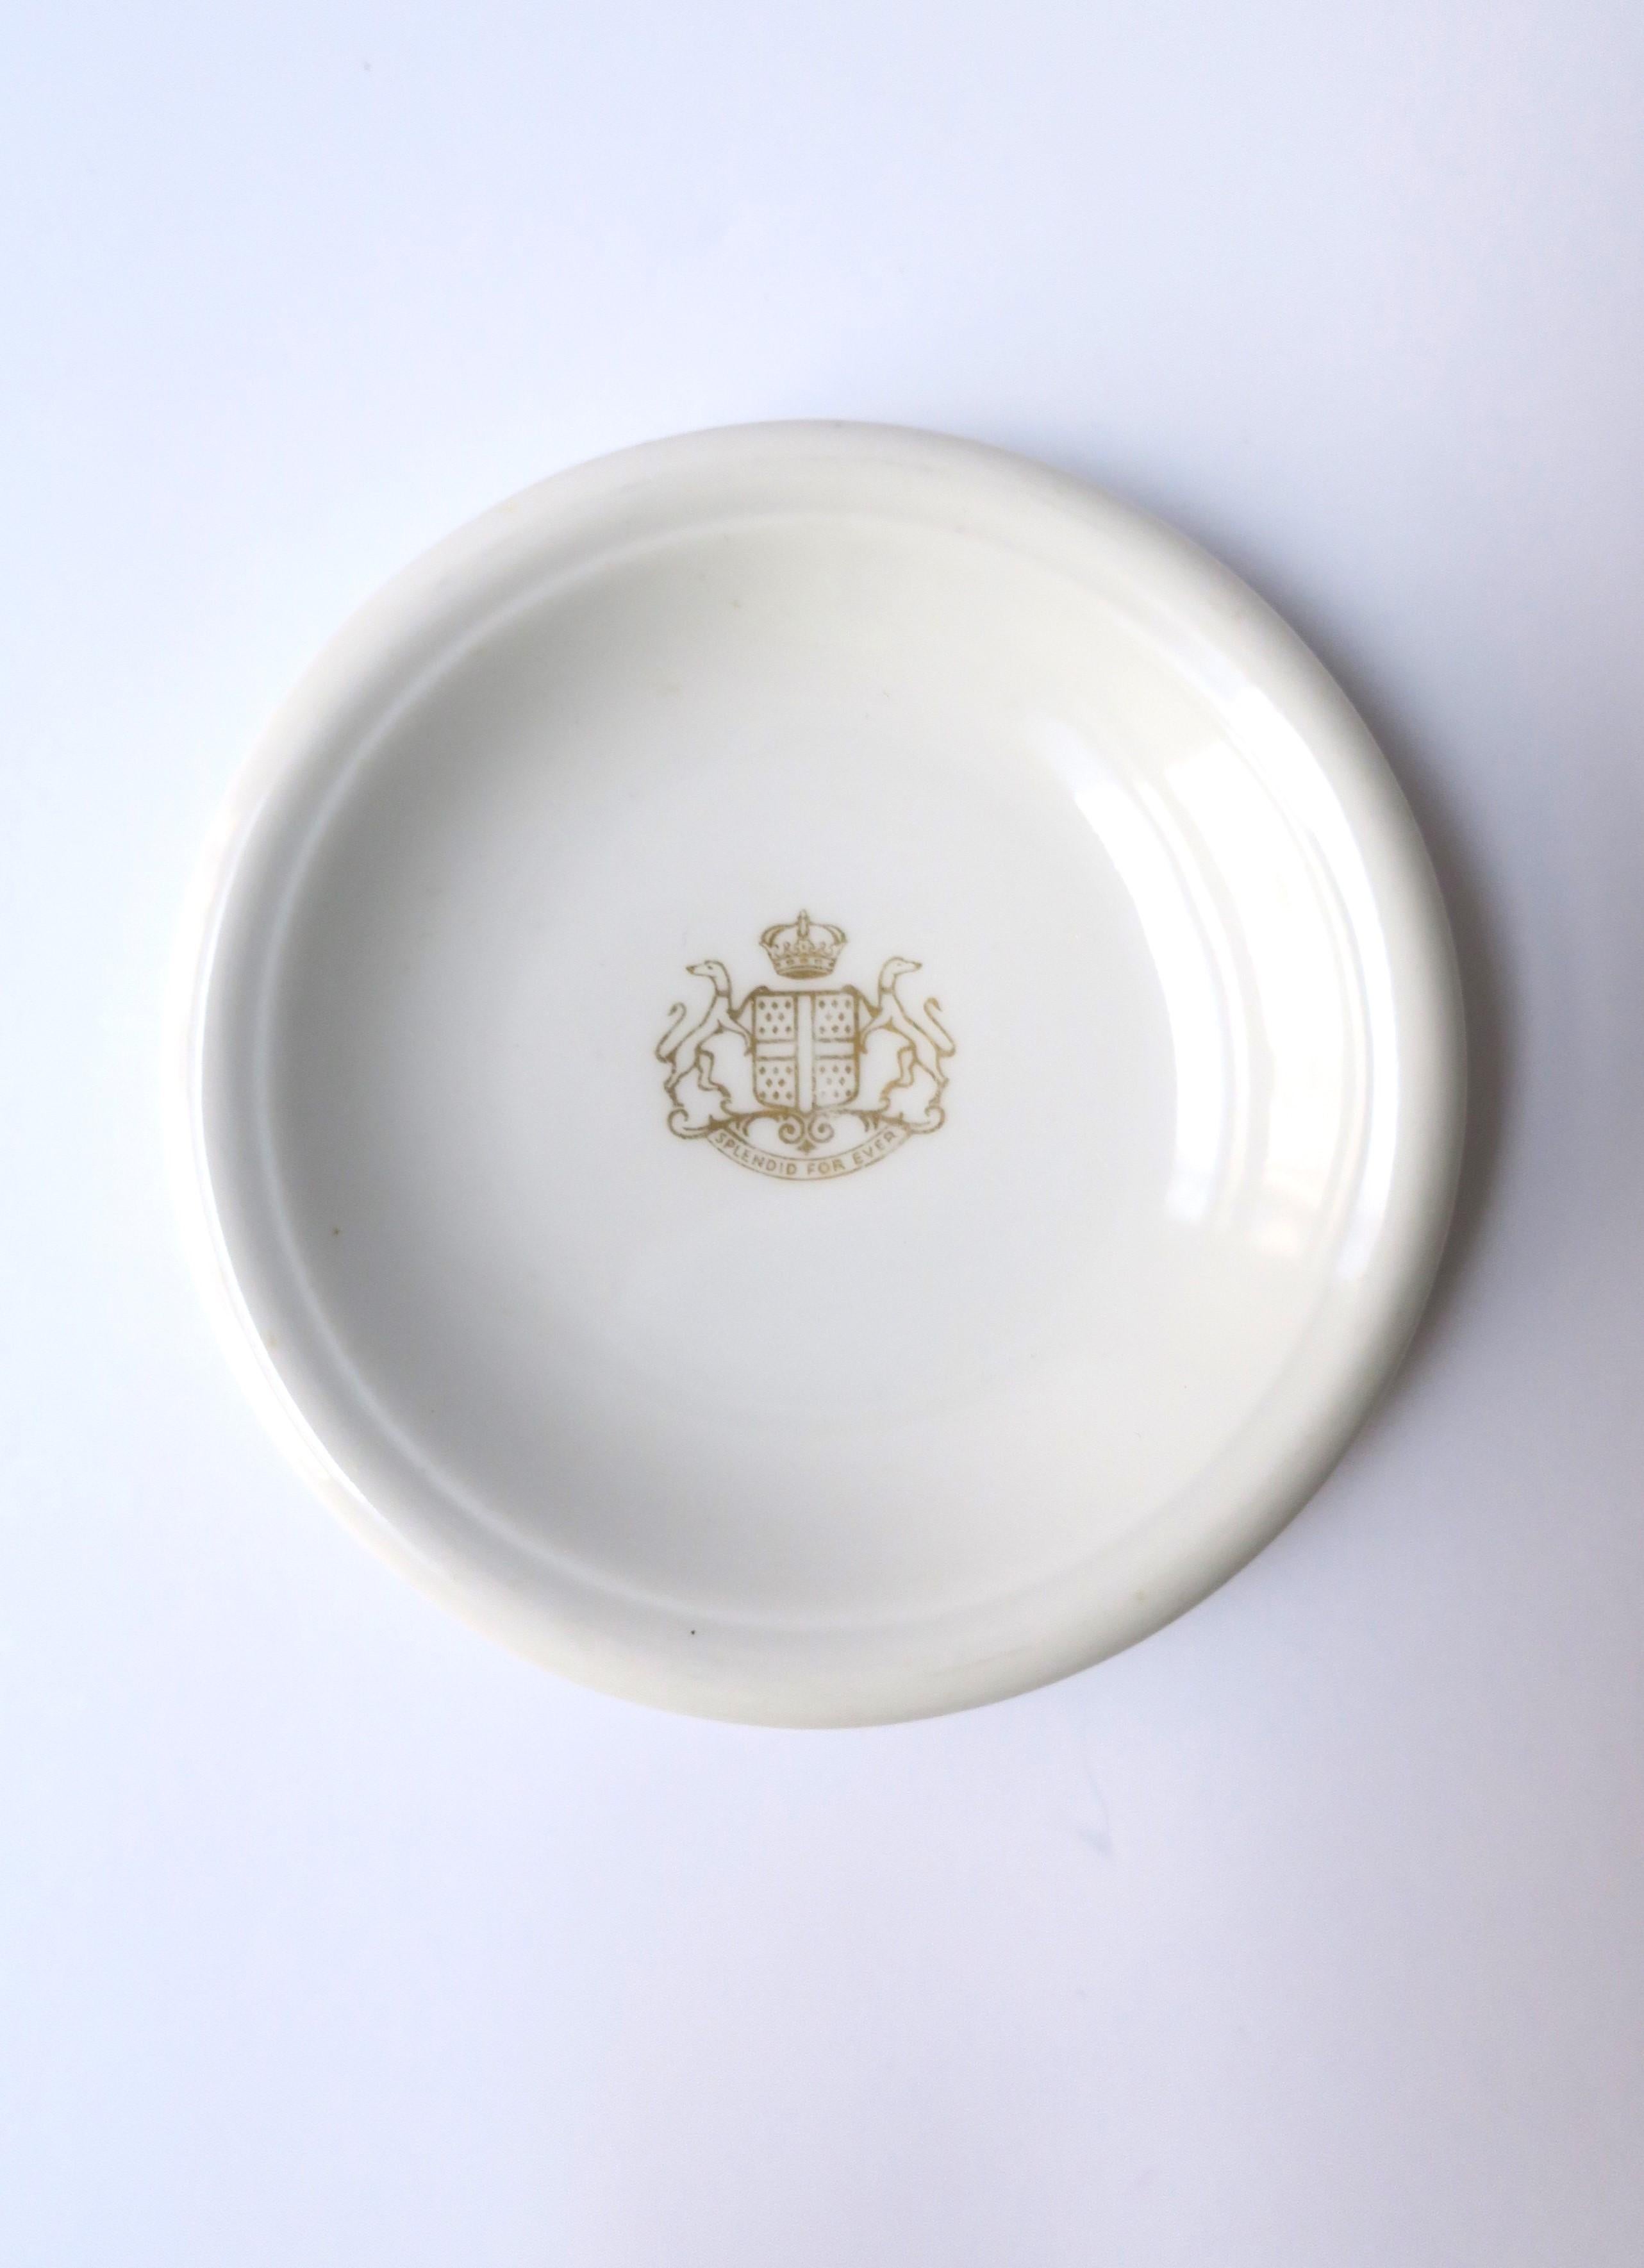 A small, rare porcelain dish, German made (Schonwald), designed by French designer Jean Luce, circa early-20th century, Germany and France. This small round dish may have been a dinnerware piece to hold a pat of butter on a cruise ship, early-20th